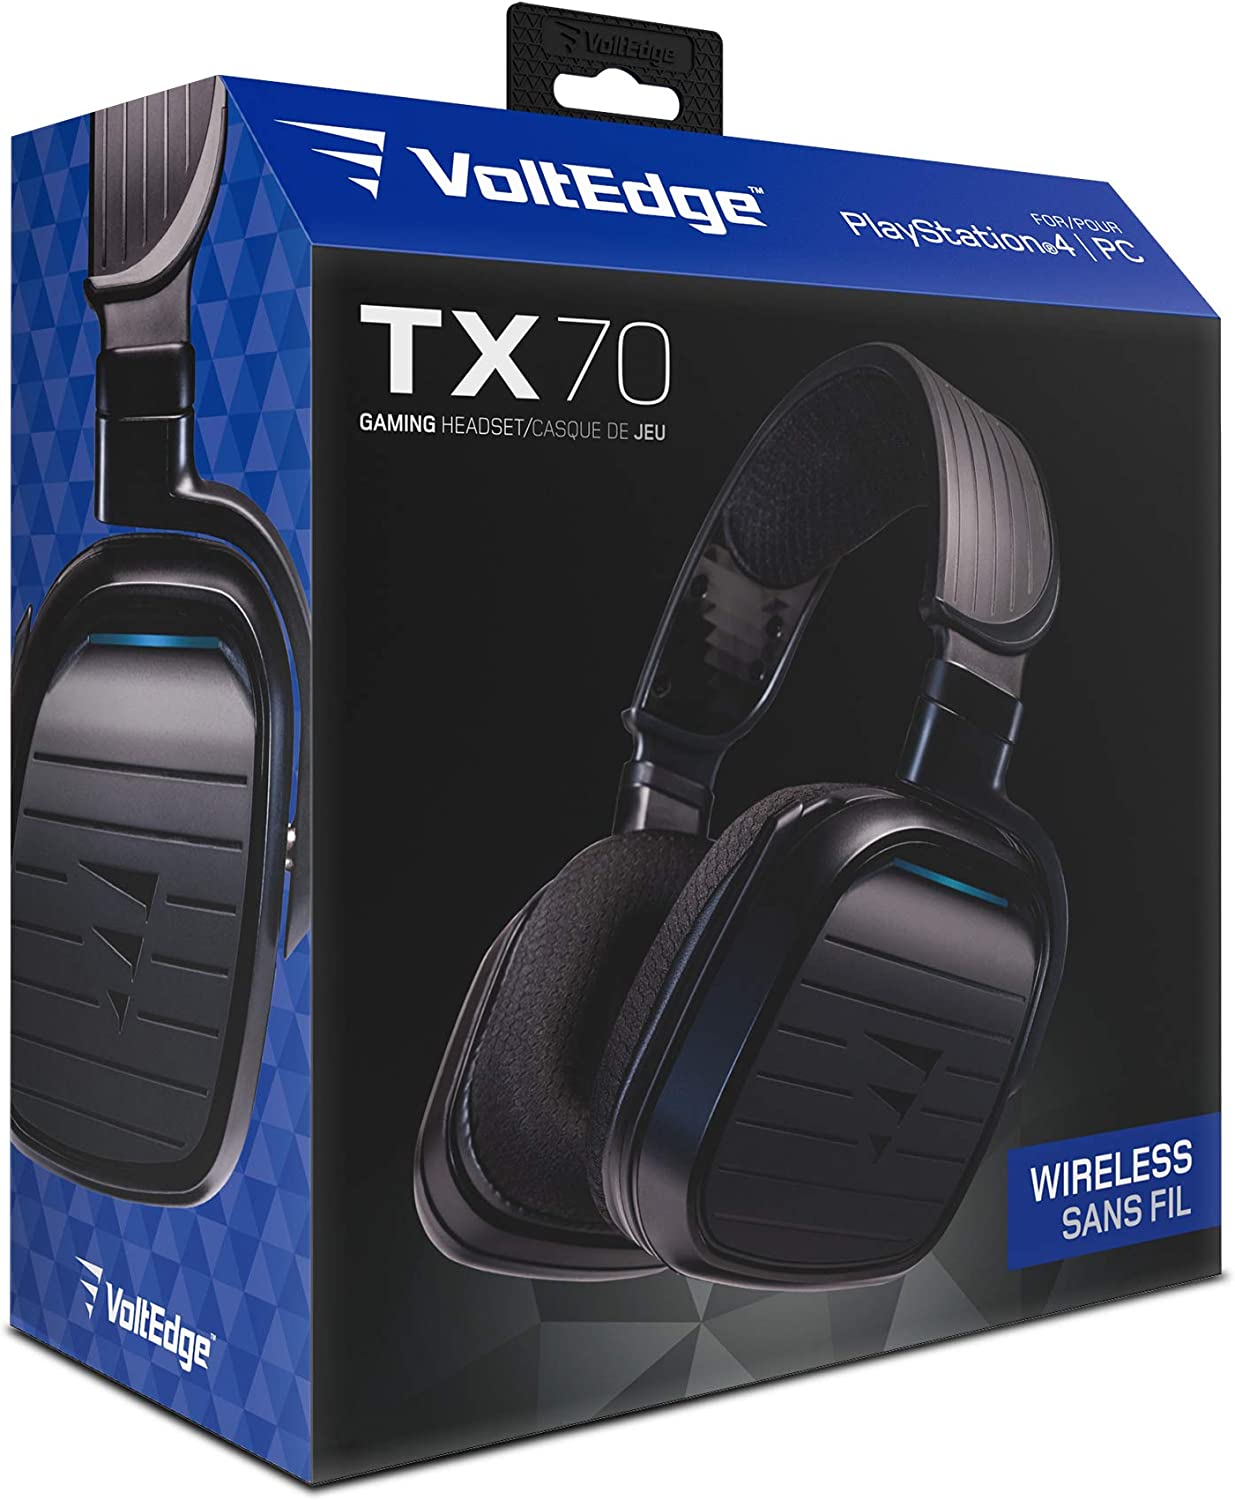 Headset Inalámbrico Voltedge TX70 - Playstation 4/5, PC